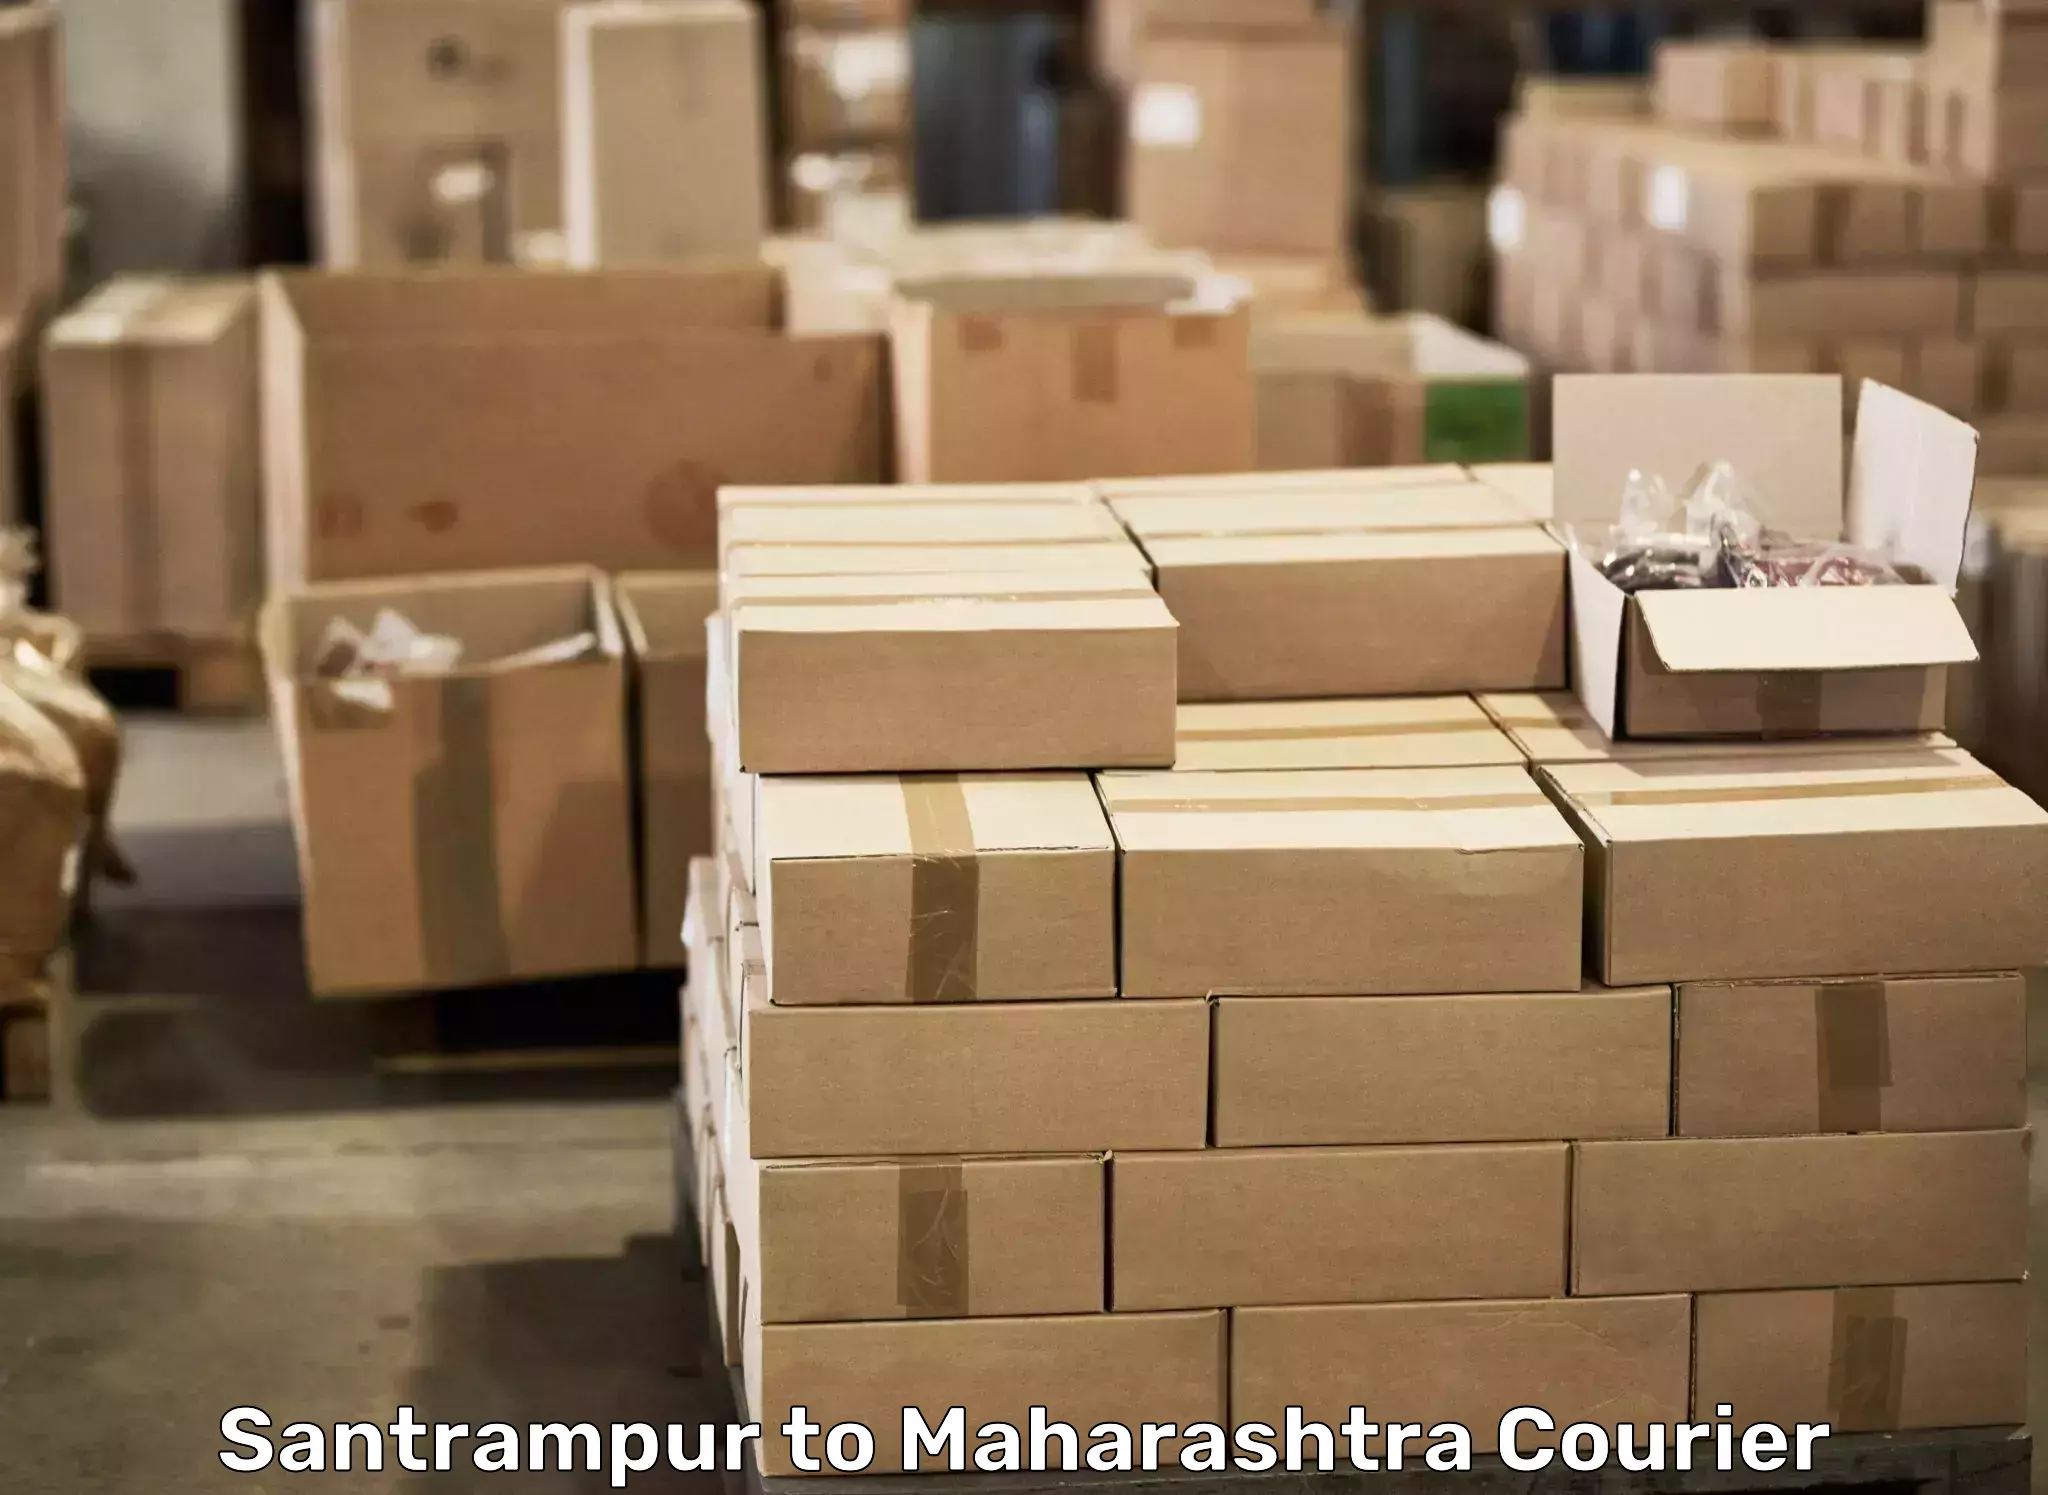 Reliable relocation services in Santrampur to Bhiwandi